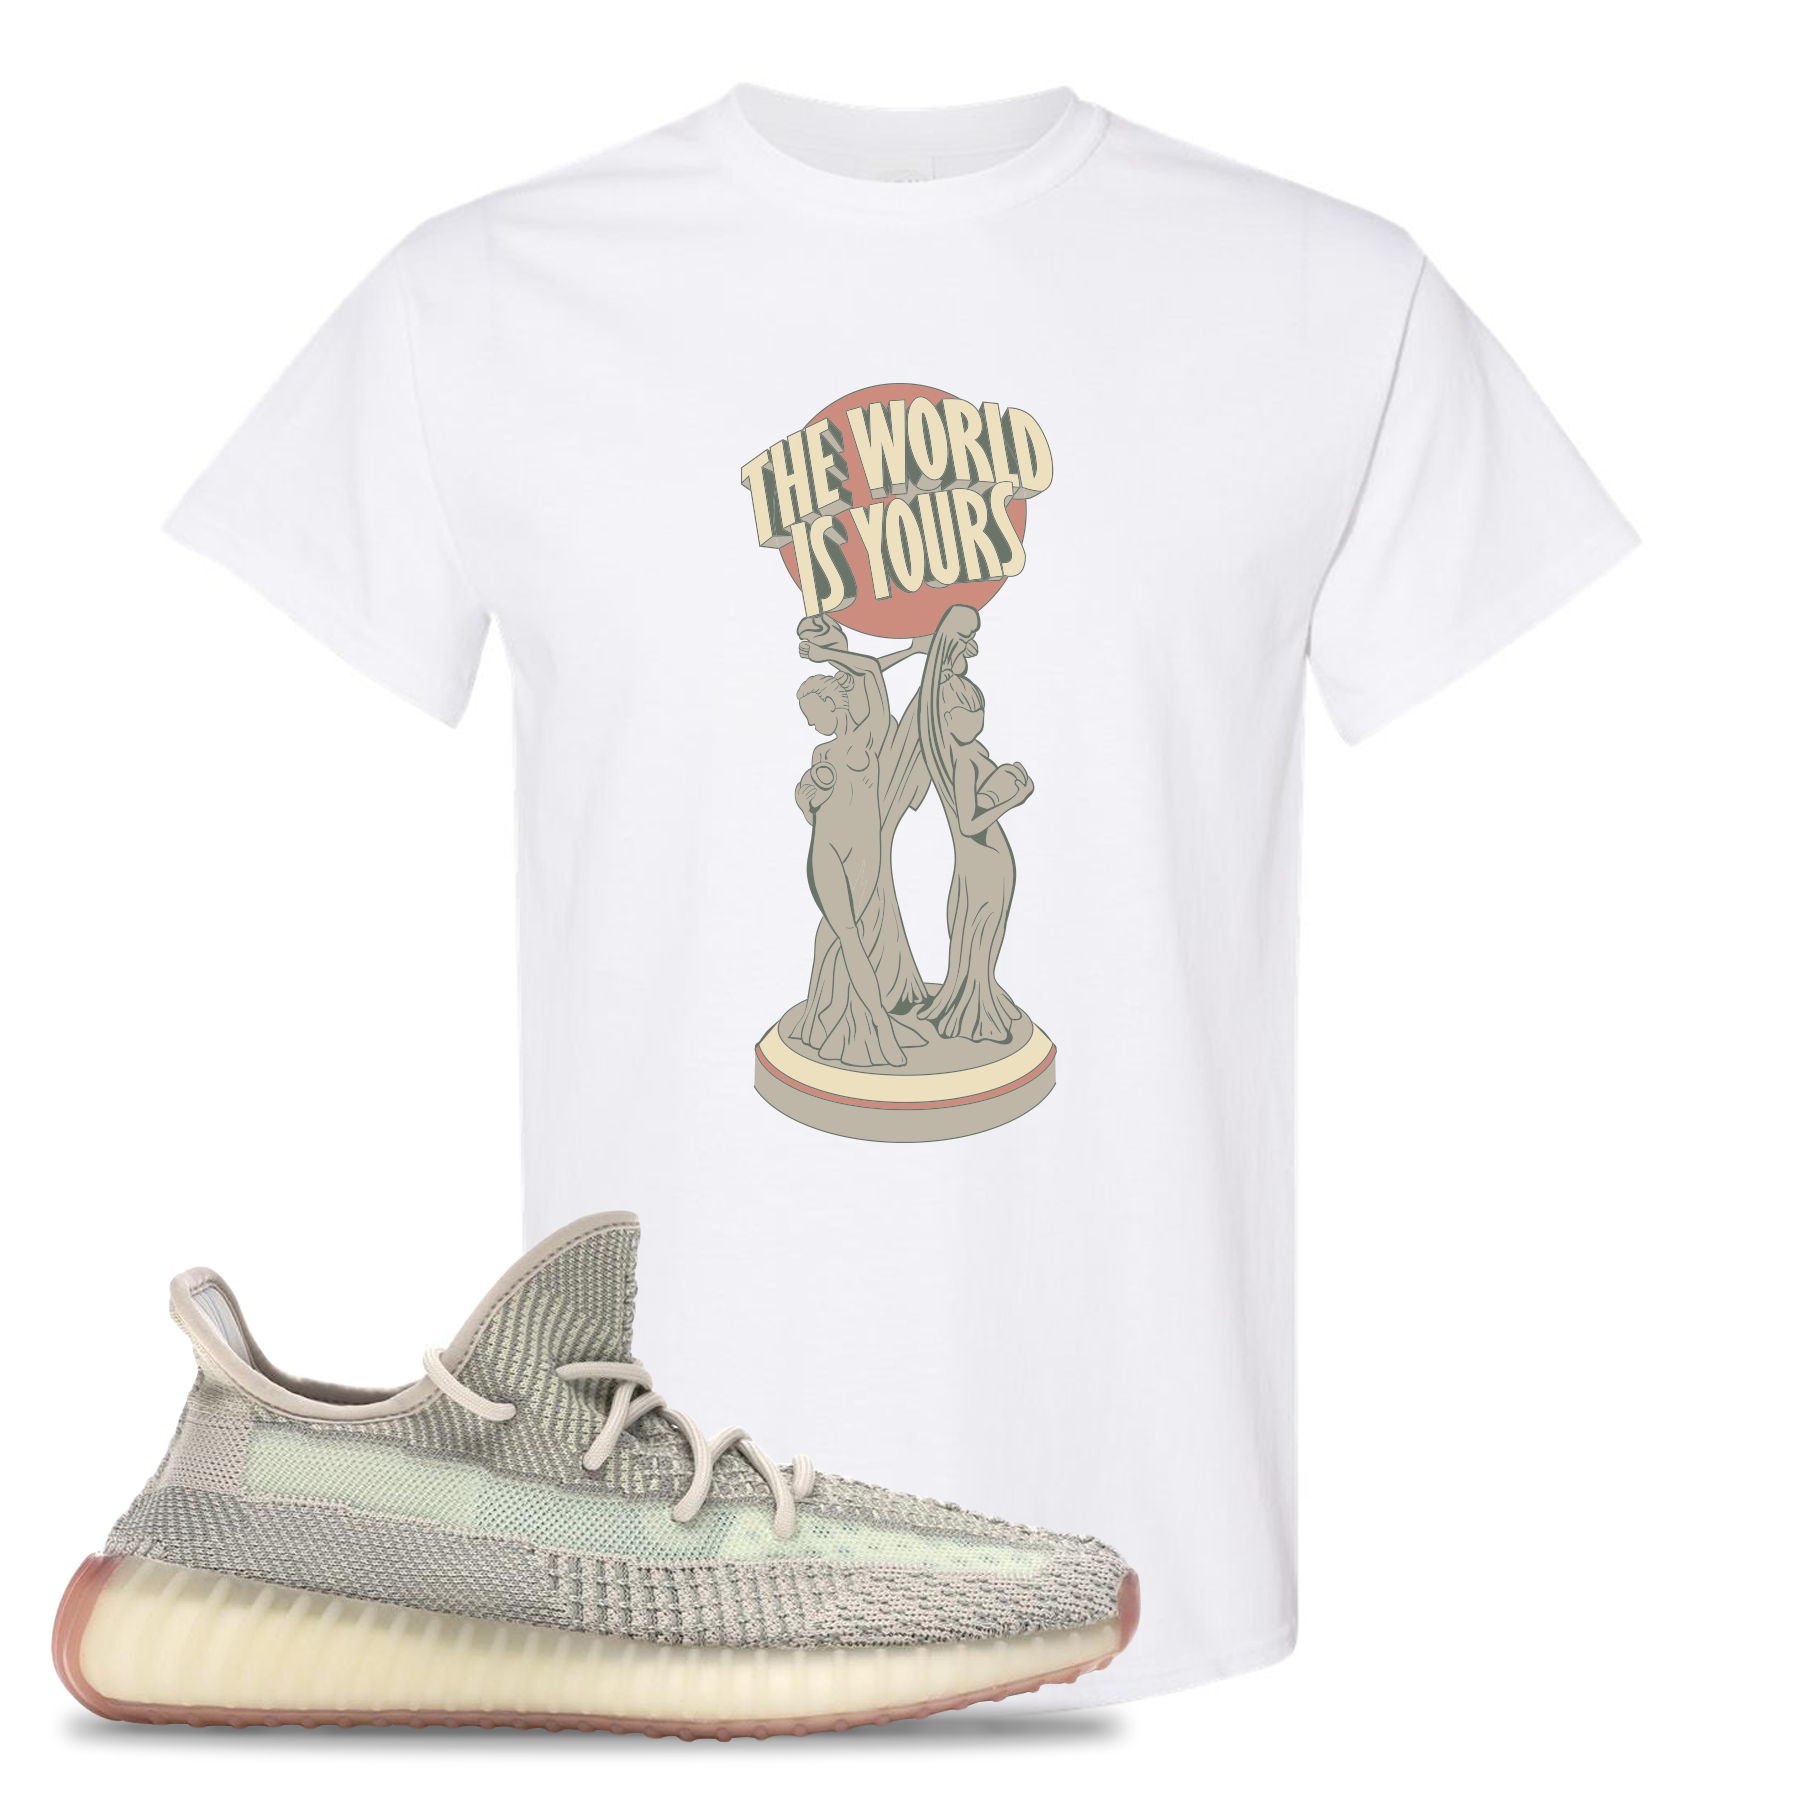 Yeezy Boost 350 V2 Citrin Non-Reflective The World Is Yours Statue White Sneaker Matching Tee Shirt